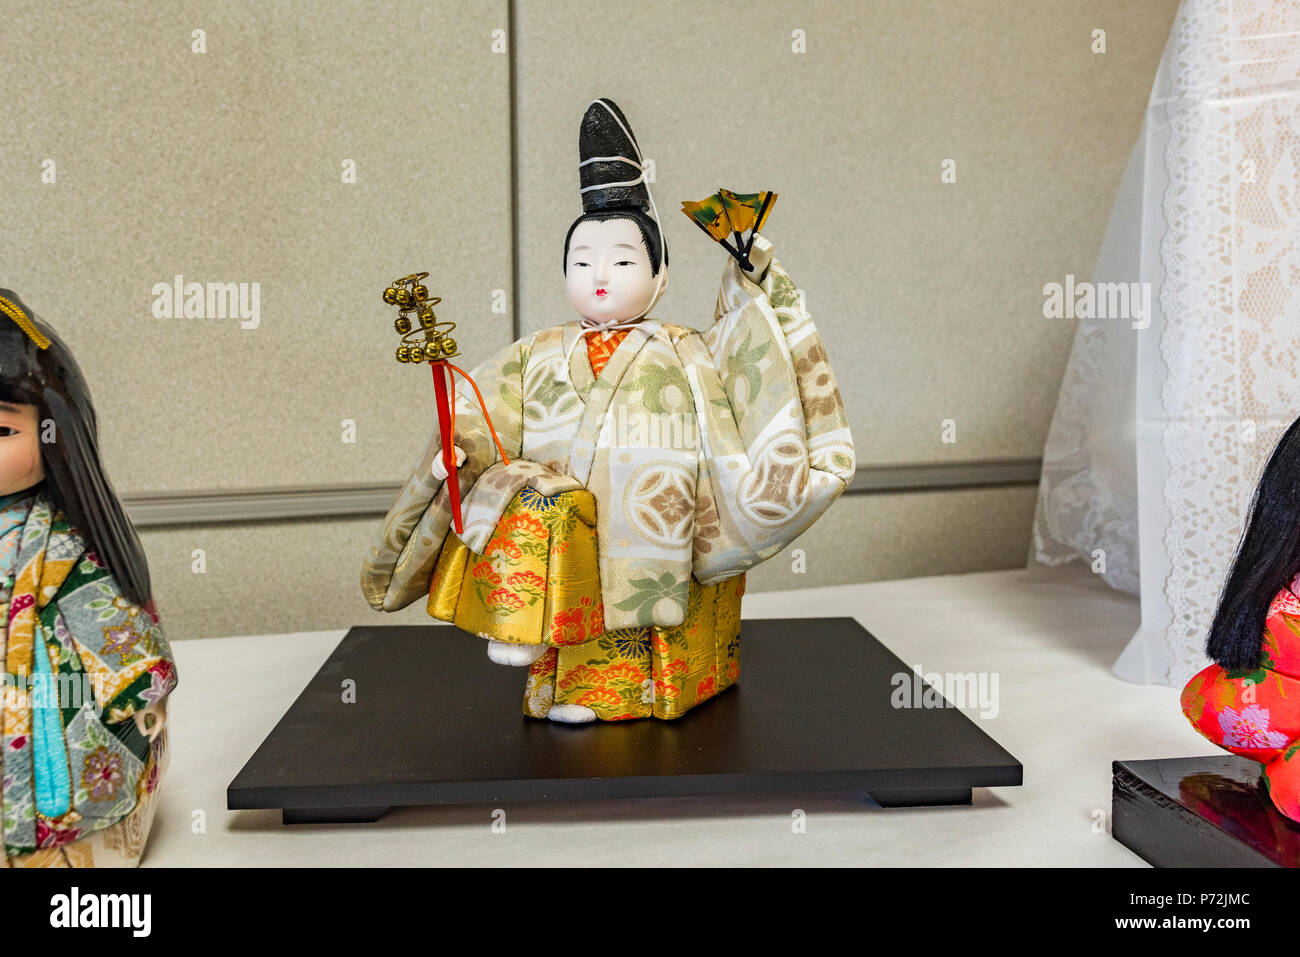 Japanese Doll High Resolution Stock Photography and Images - Alamy